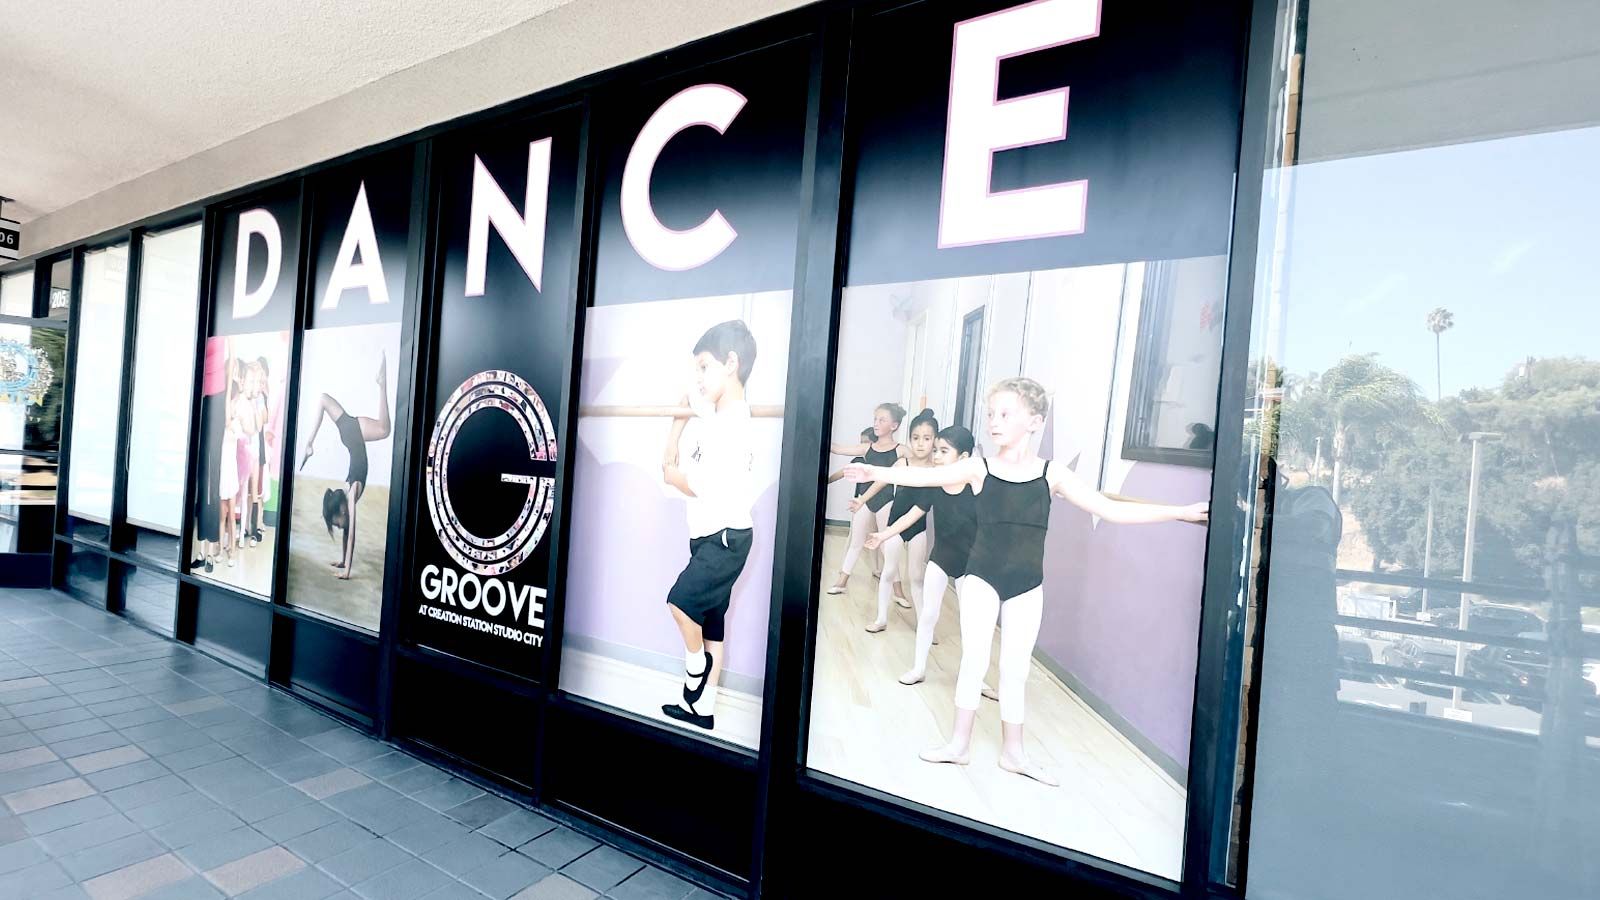 GROOVE at creation station studio city full window decals